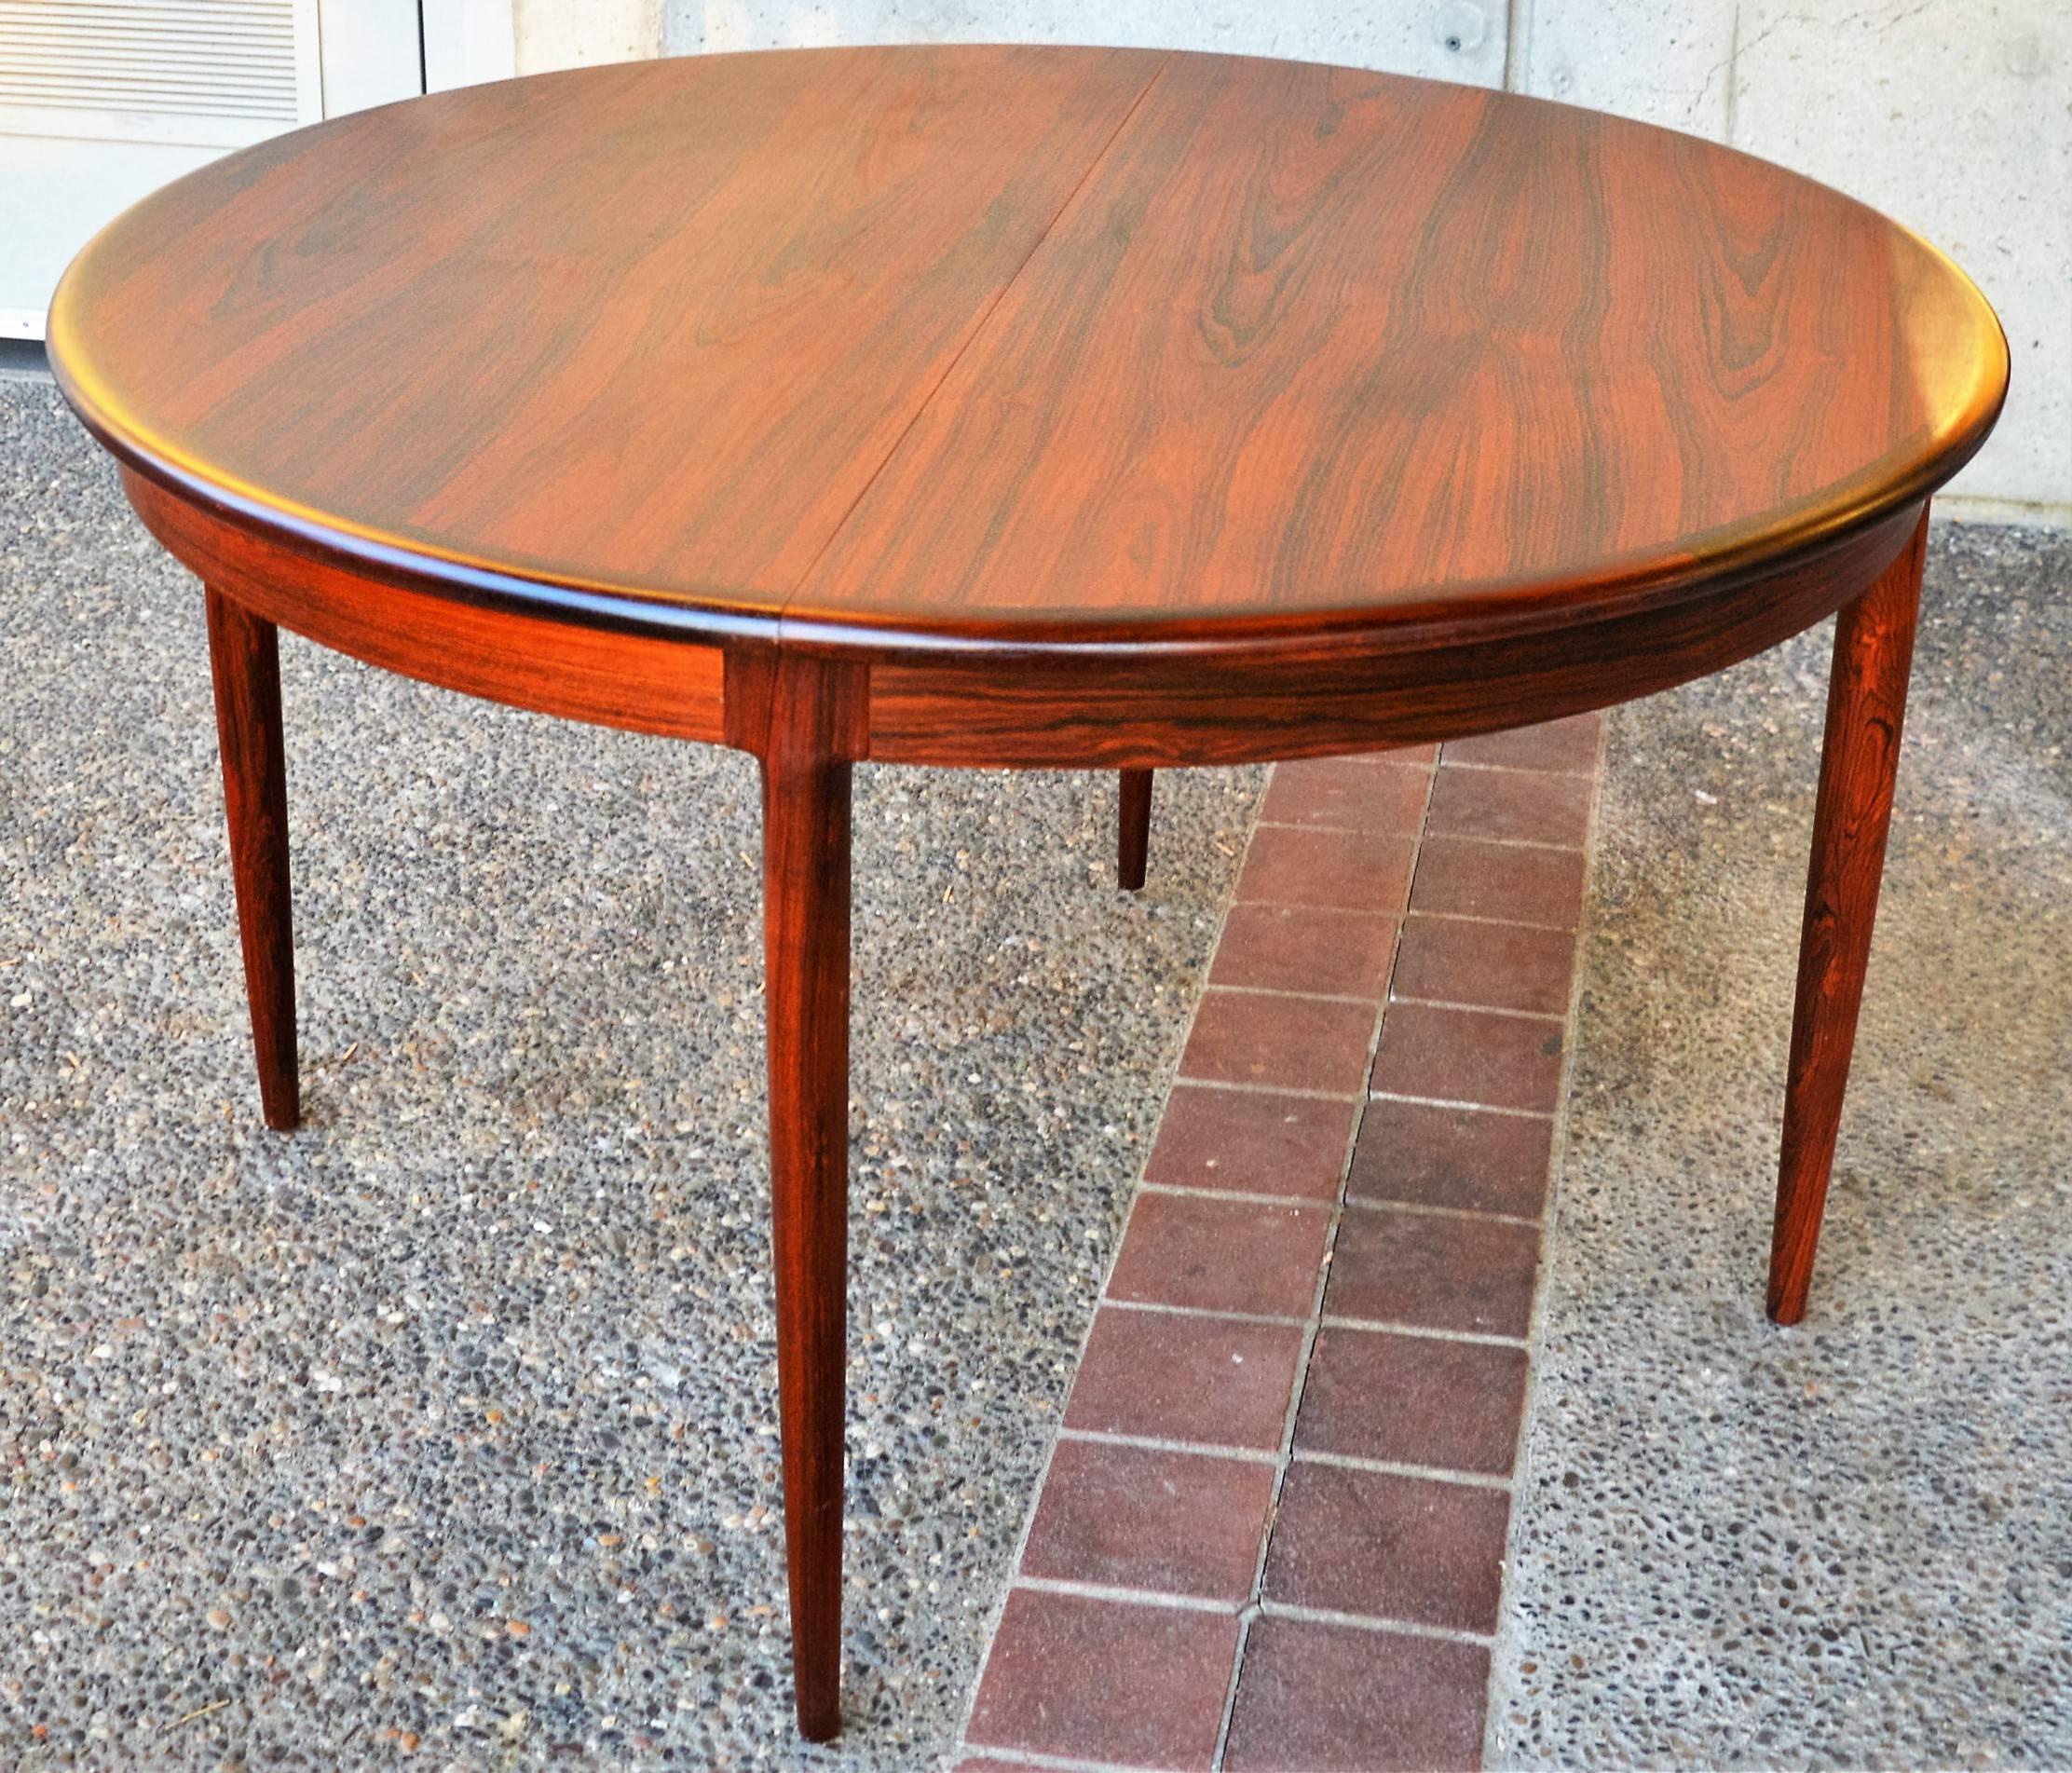 This impeccable Danish modern rosewood dining set was entirely designed by N.O. Moller and bears the Danish quality control symbol as well as the Maker's Marks/Medallions. The dining table is a very unique one that was minimally produced in